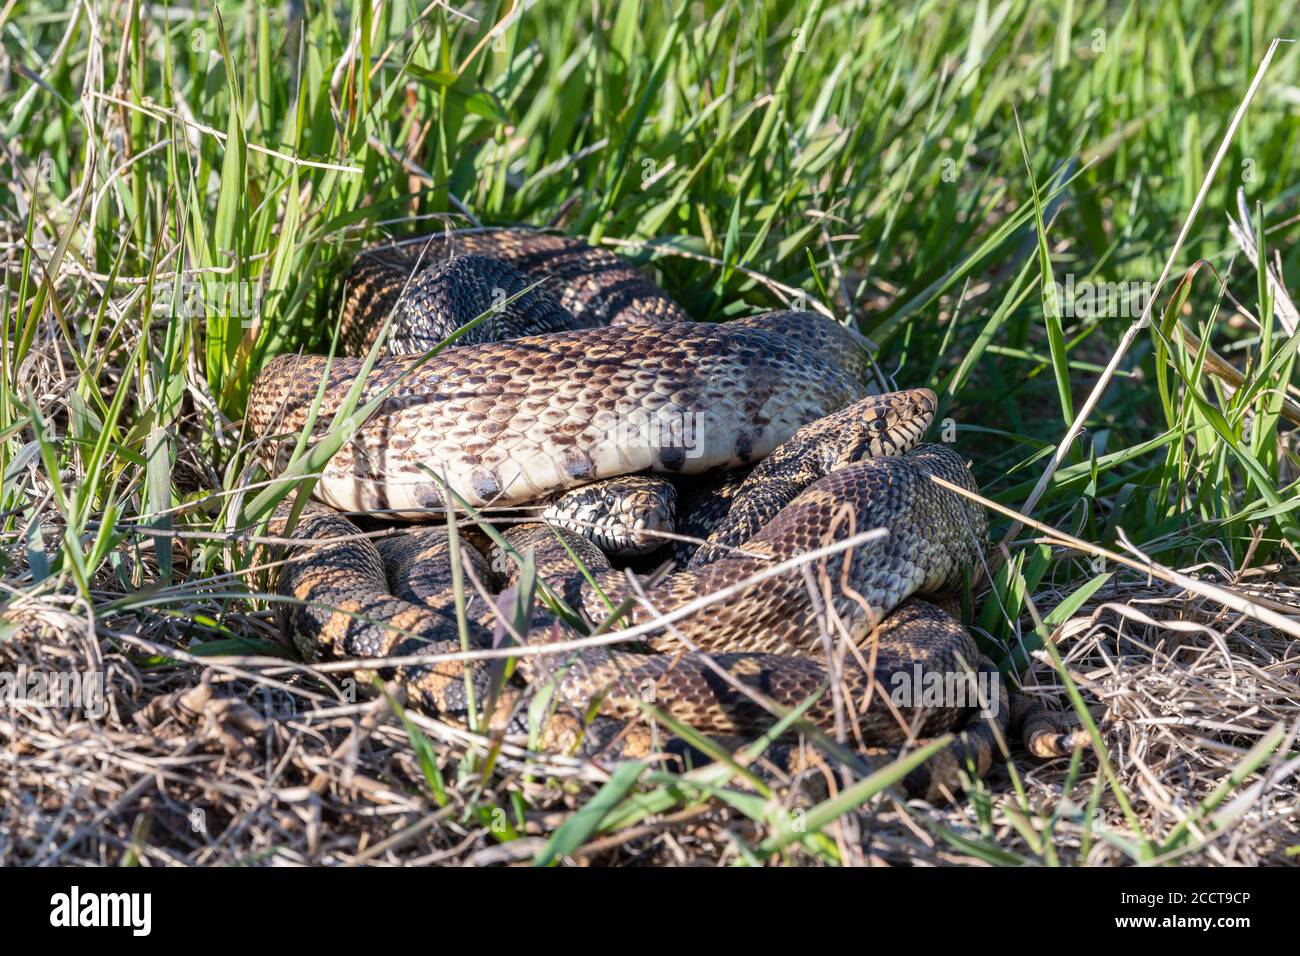 Two Bullsnakes coiled together (Pituophis catenifer sayi), Eastern United states, by Dominique Braud/Dembinsky Photo Assoc Stock Photo